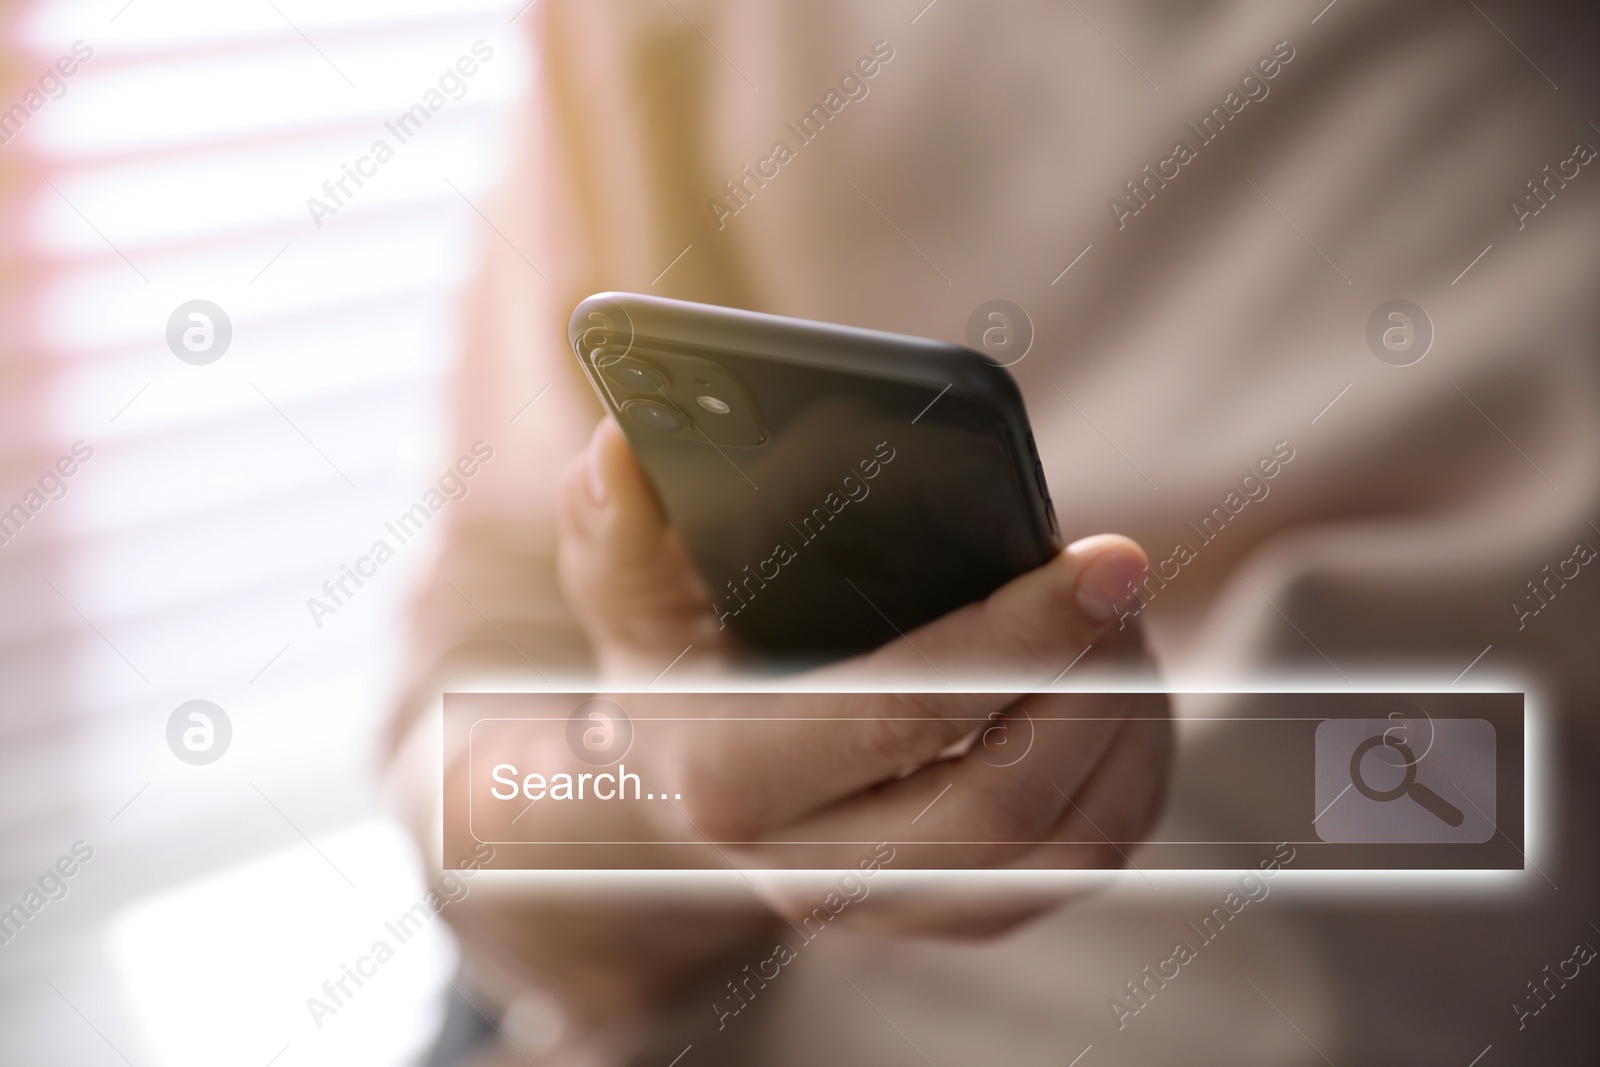 Image of Search bar of website near smartphone. Man using device indoors, closeup